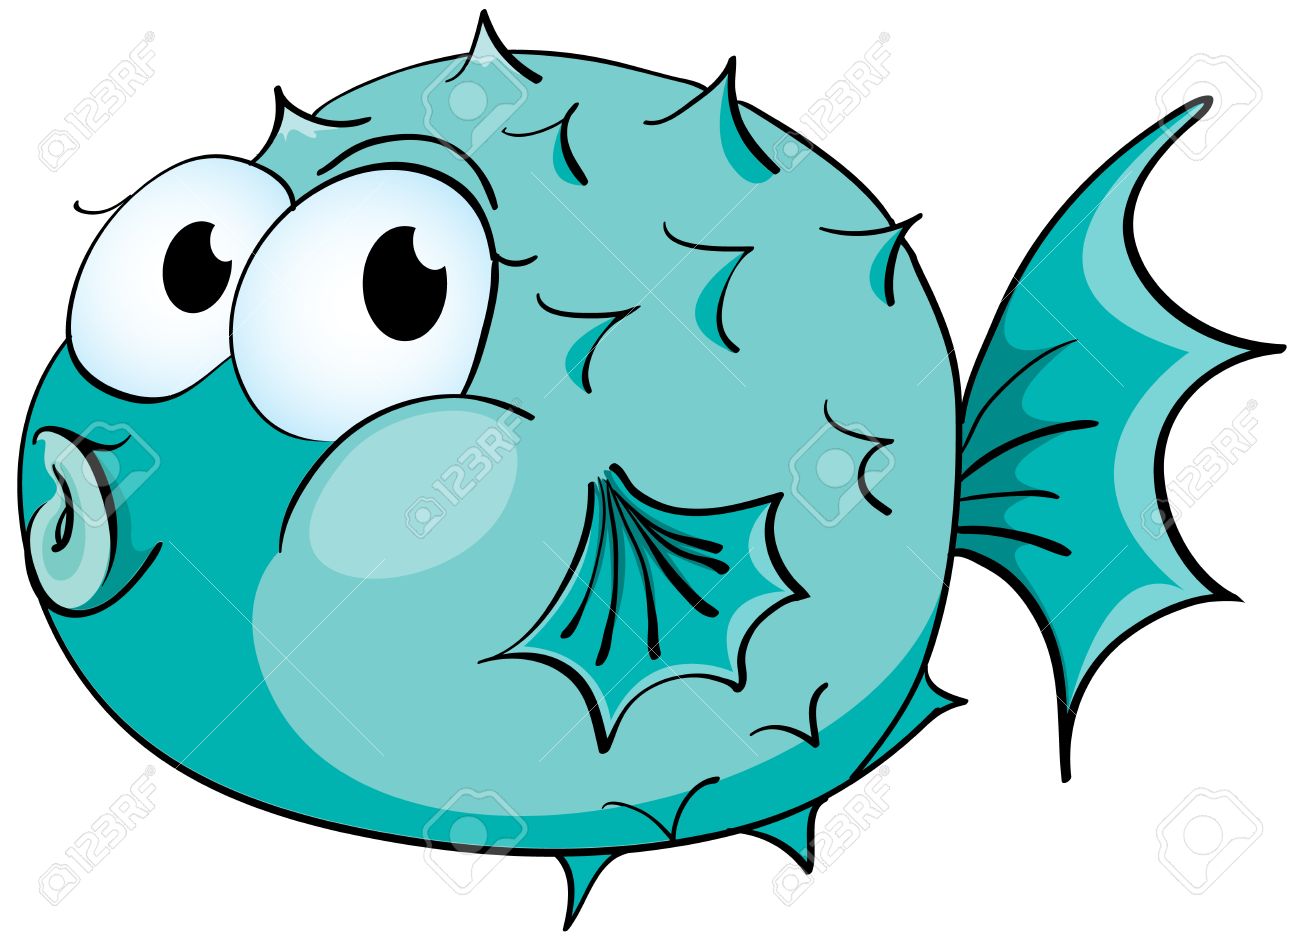 Pufferfish clipart #20, Download drawings